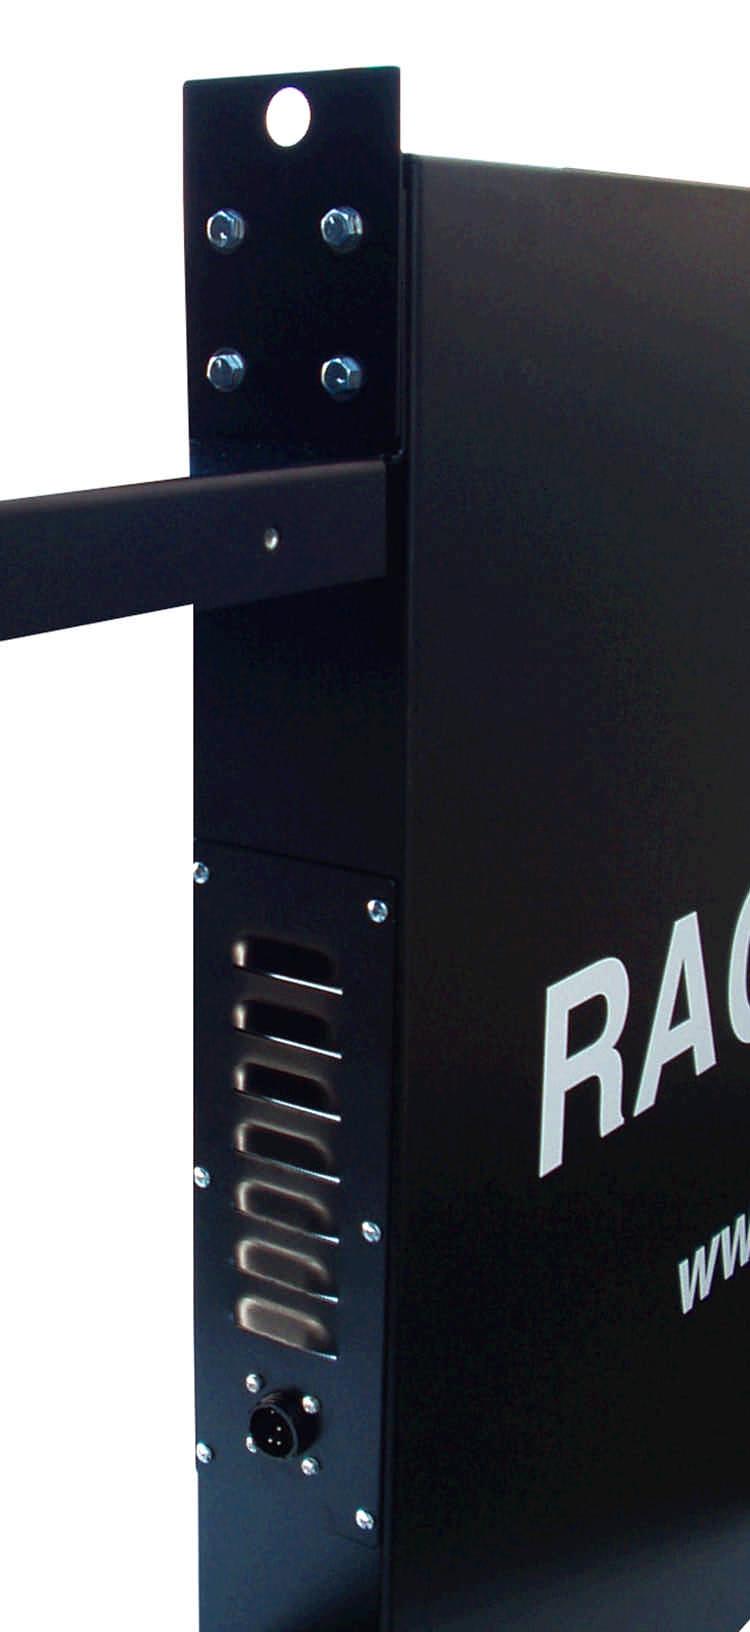 PRODUCT SET-UP RaceAmerica Model 6812C Dual Lane Scoreboard Model 6812C Dual Lane Scoreboard is designed to hang from side mounted hanger plates or be solid mounted directly to the side frames of